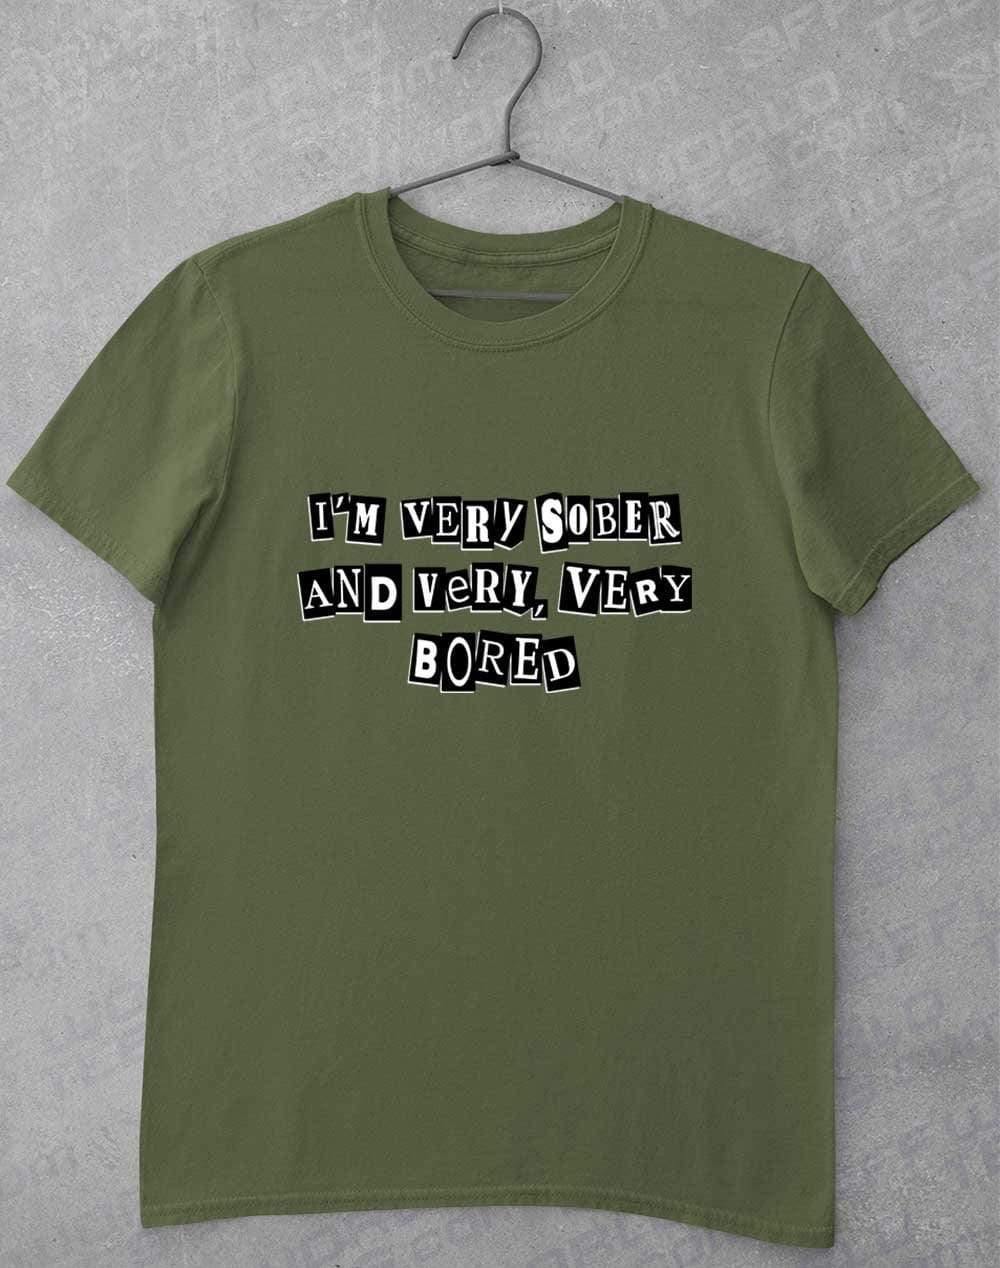 I'm Very Sober and Very Very Bored T-Shirt S / Military Green  - Off World Tees